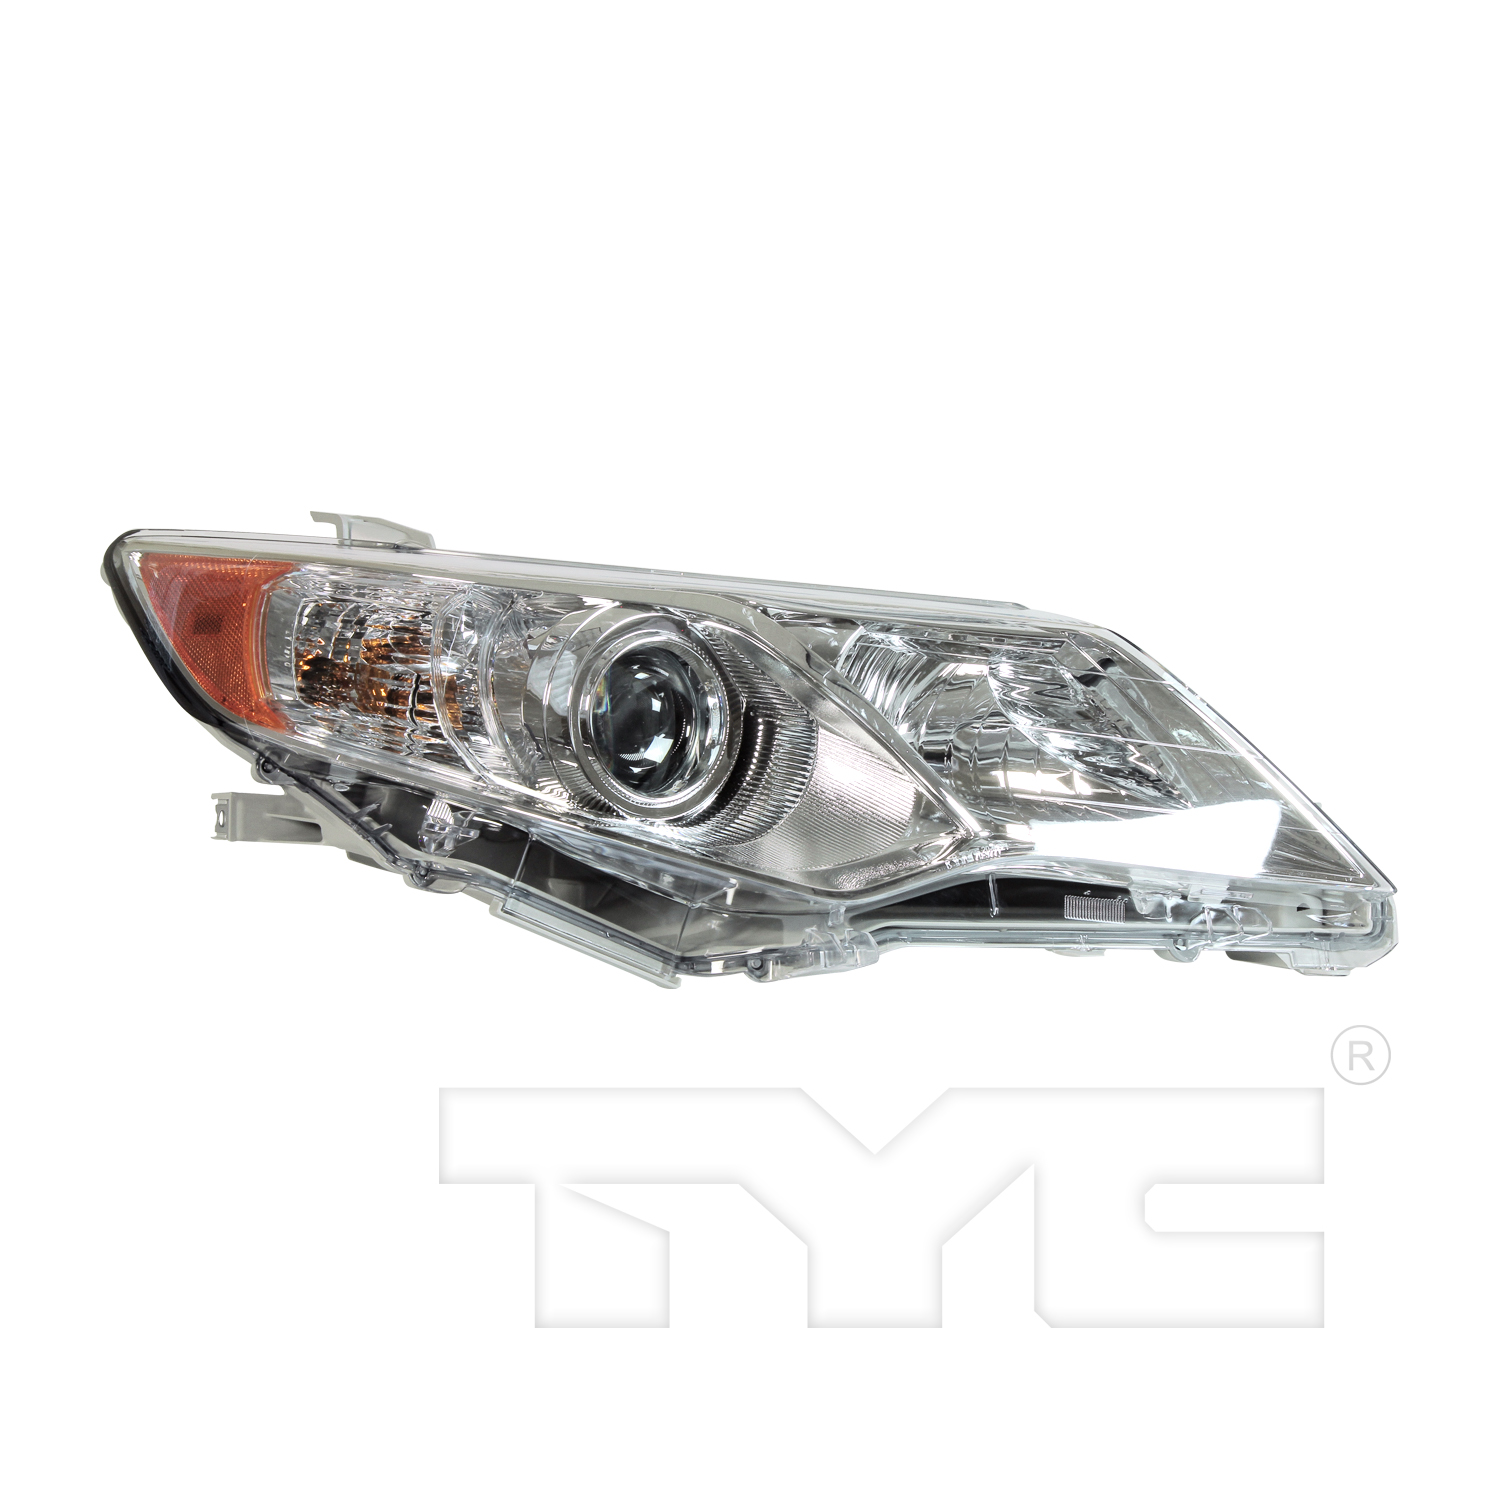 Aftermarket HEADLIGHTS for TOYOTA - CAMRY, CAMRY,12-14,RT Headlamp assy composite